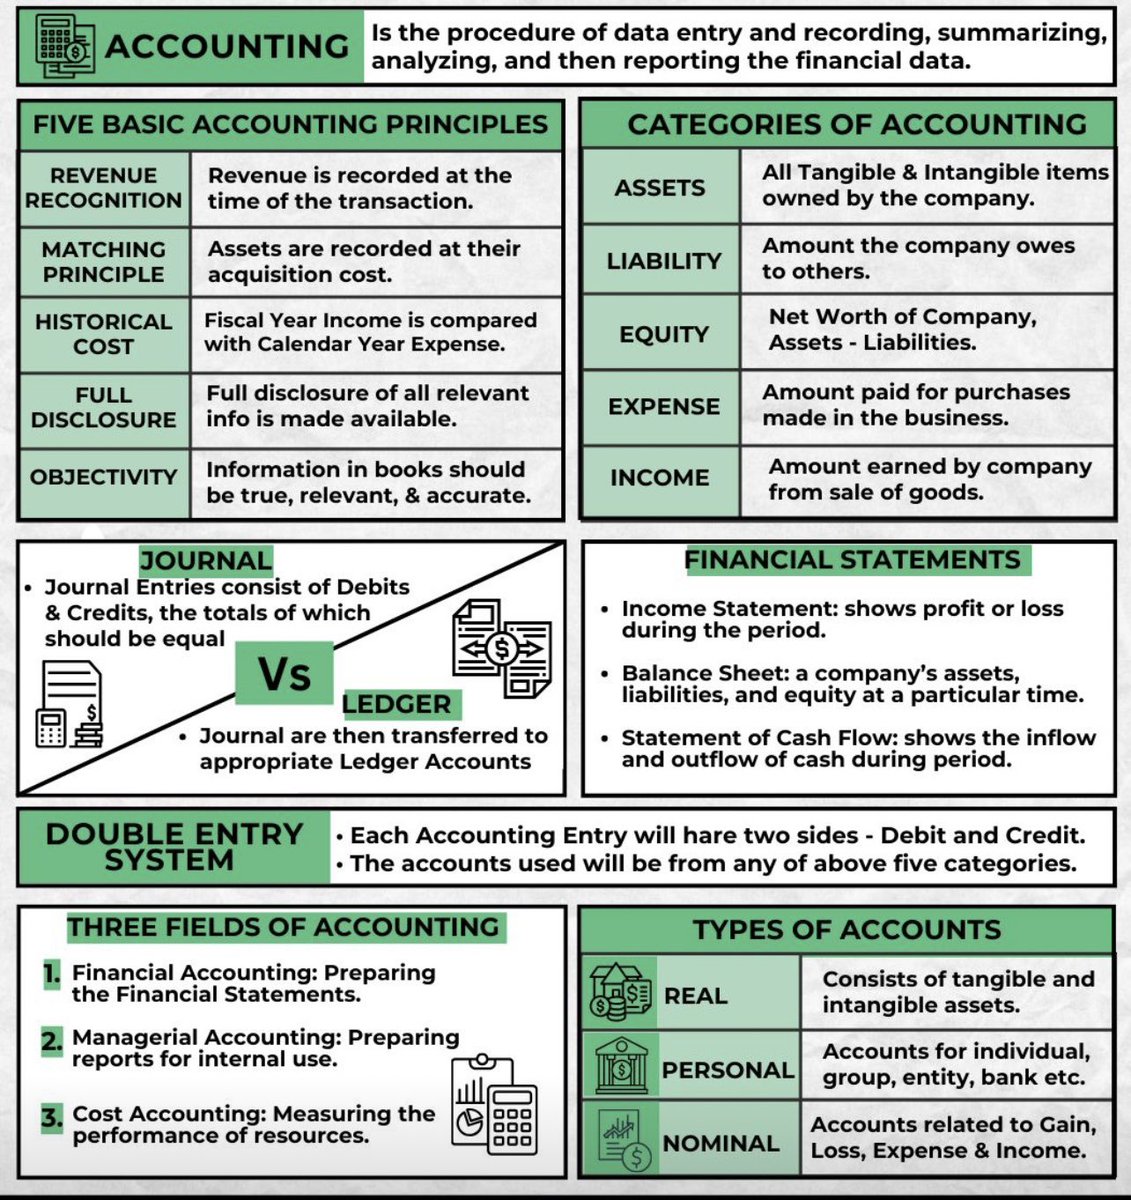 Fundamentals of Accounting in a Picture👌🏻🤩

- By Brian Feroldi
#محاسبة #Accounting